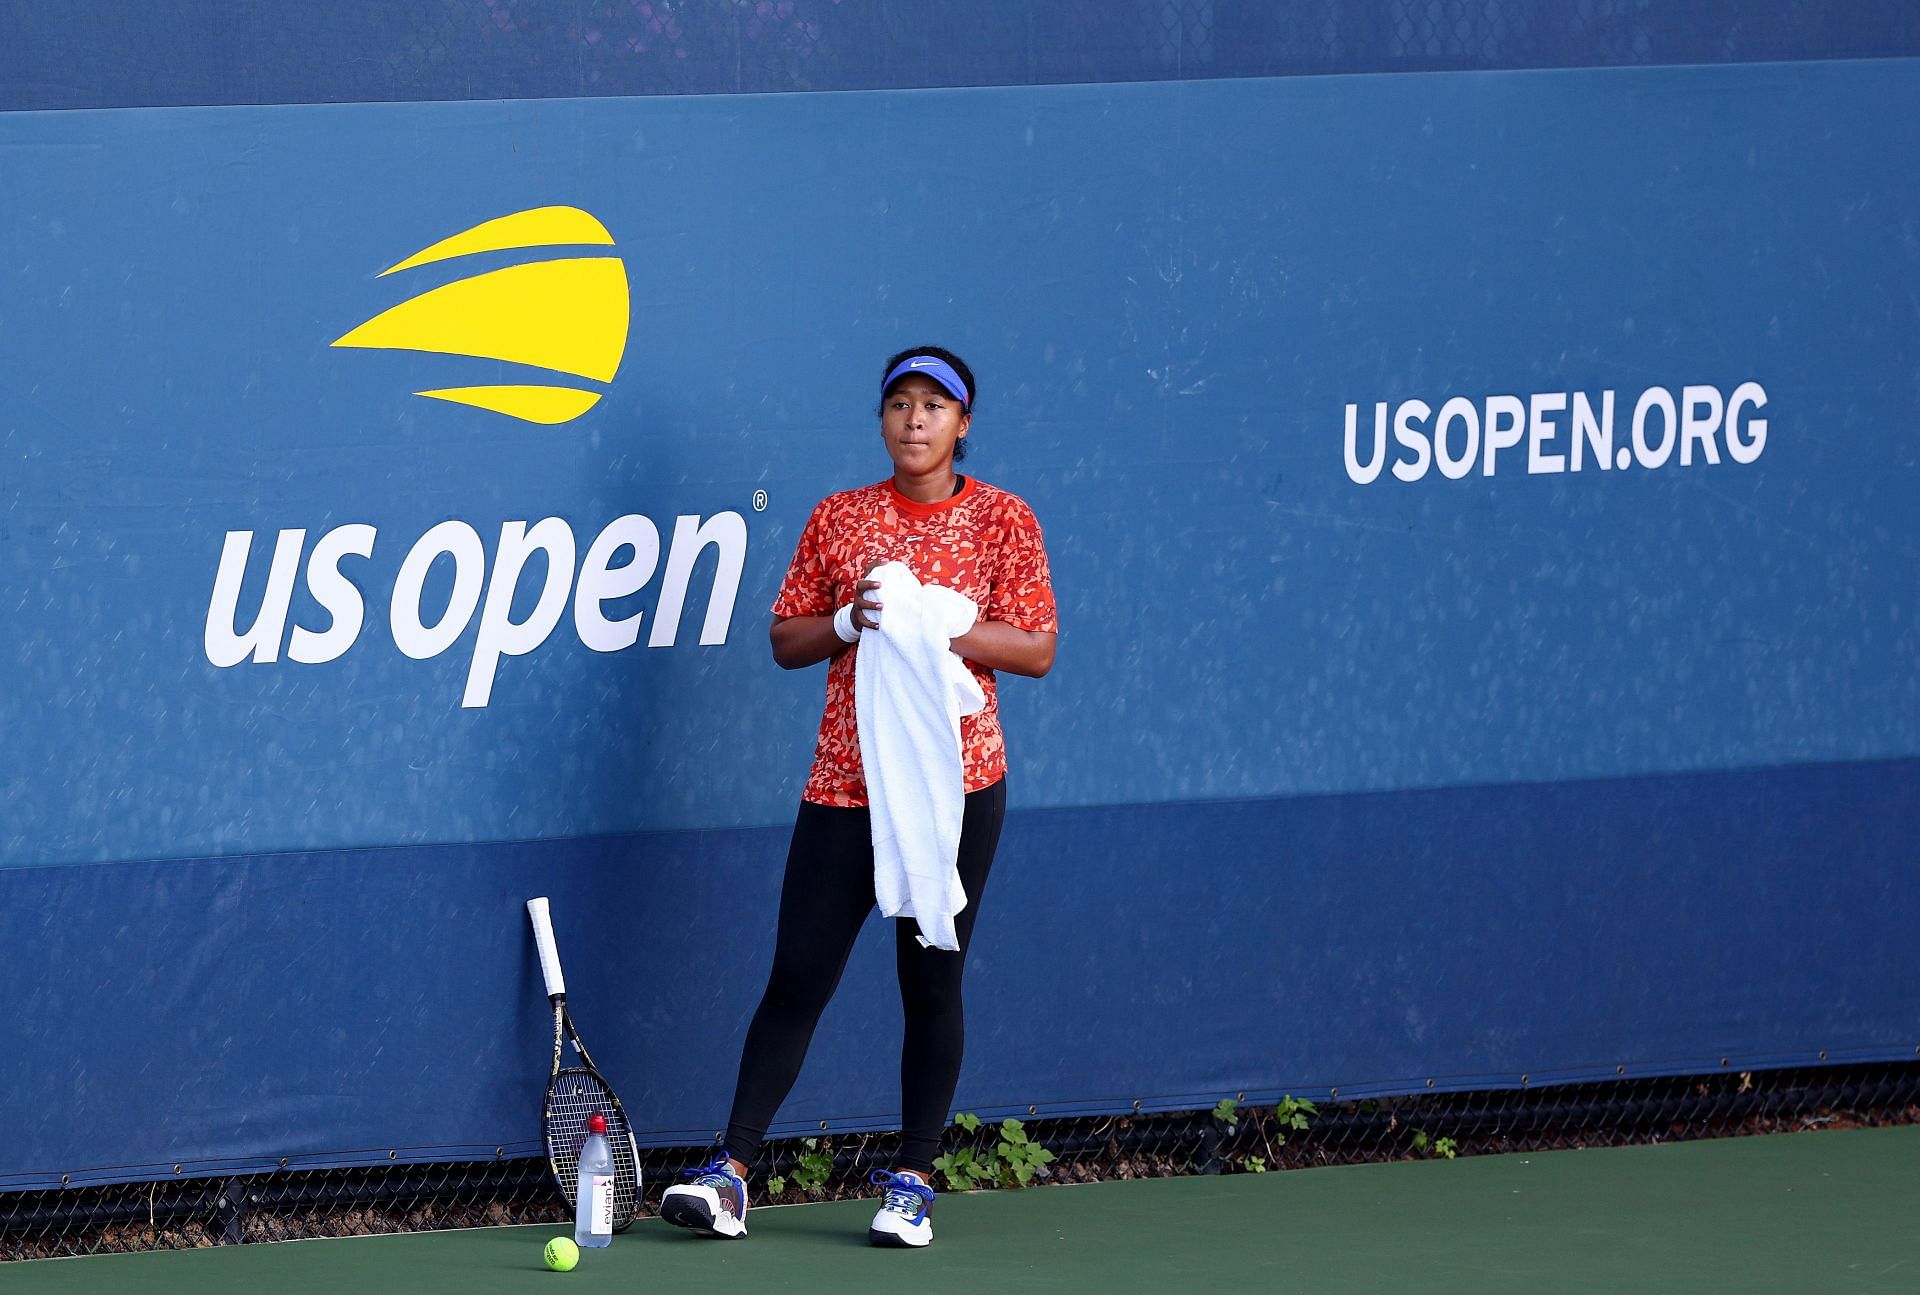 Naomi Osaka faces a tough task in the first round